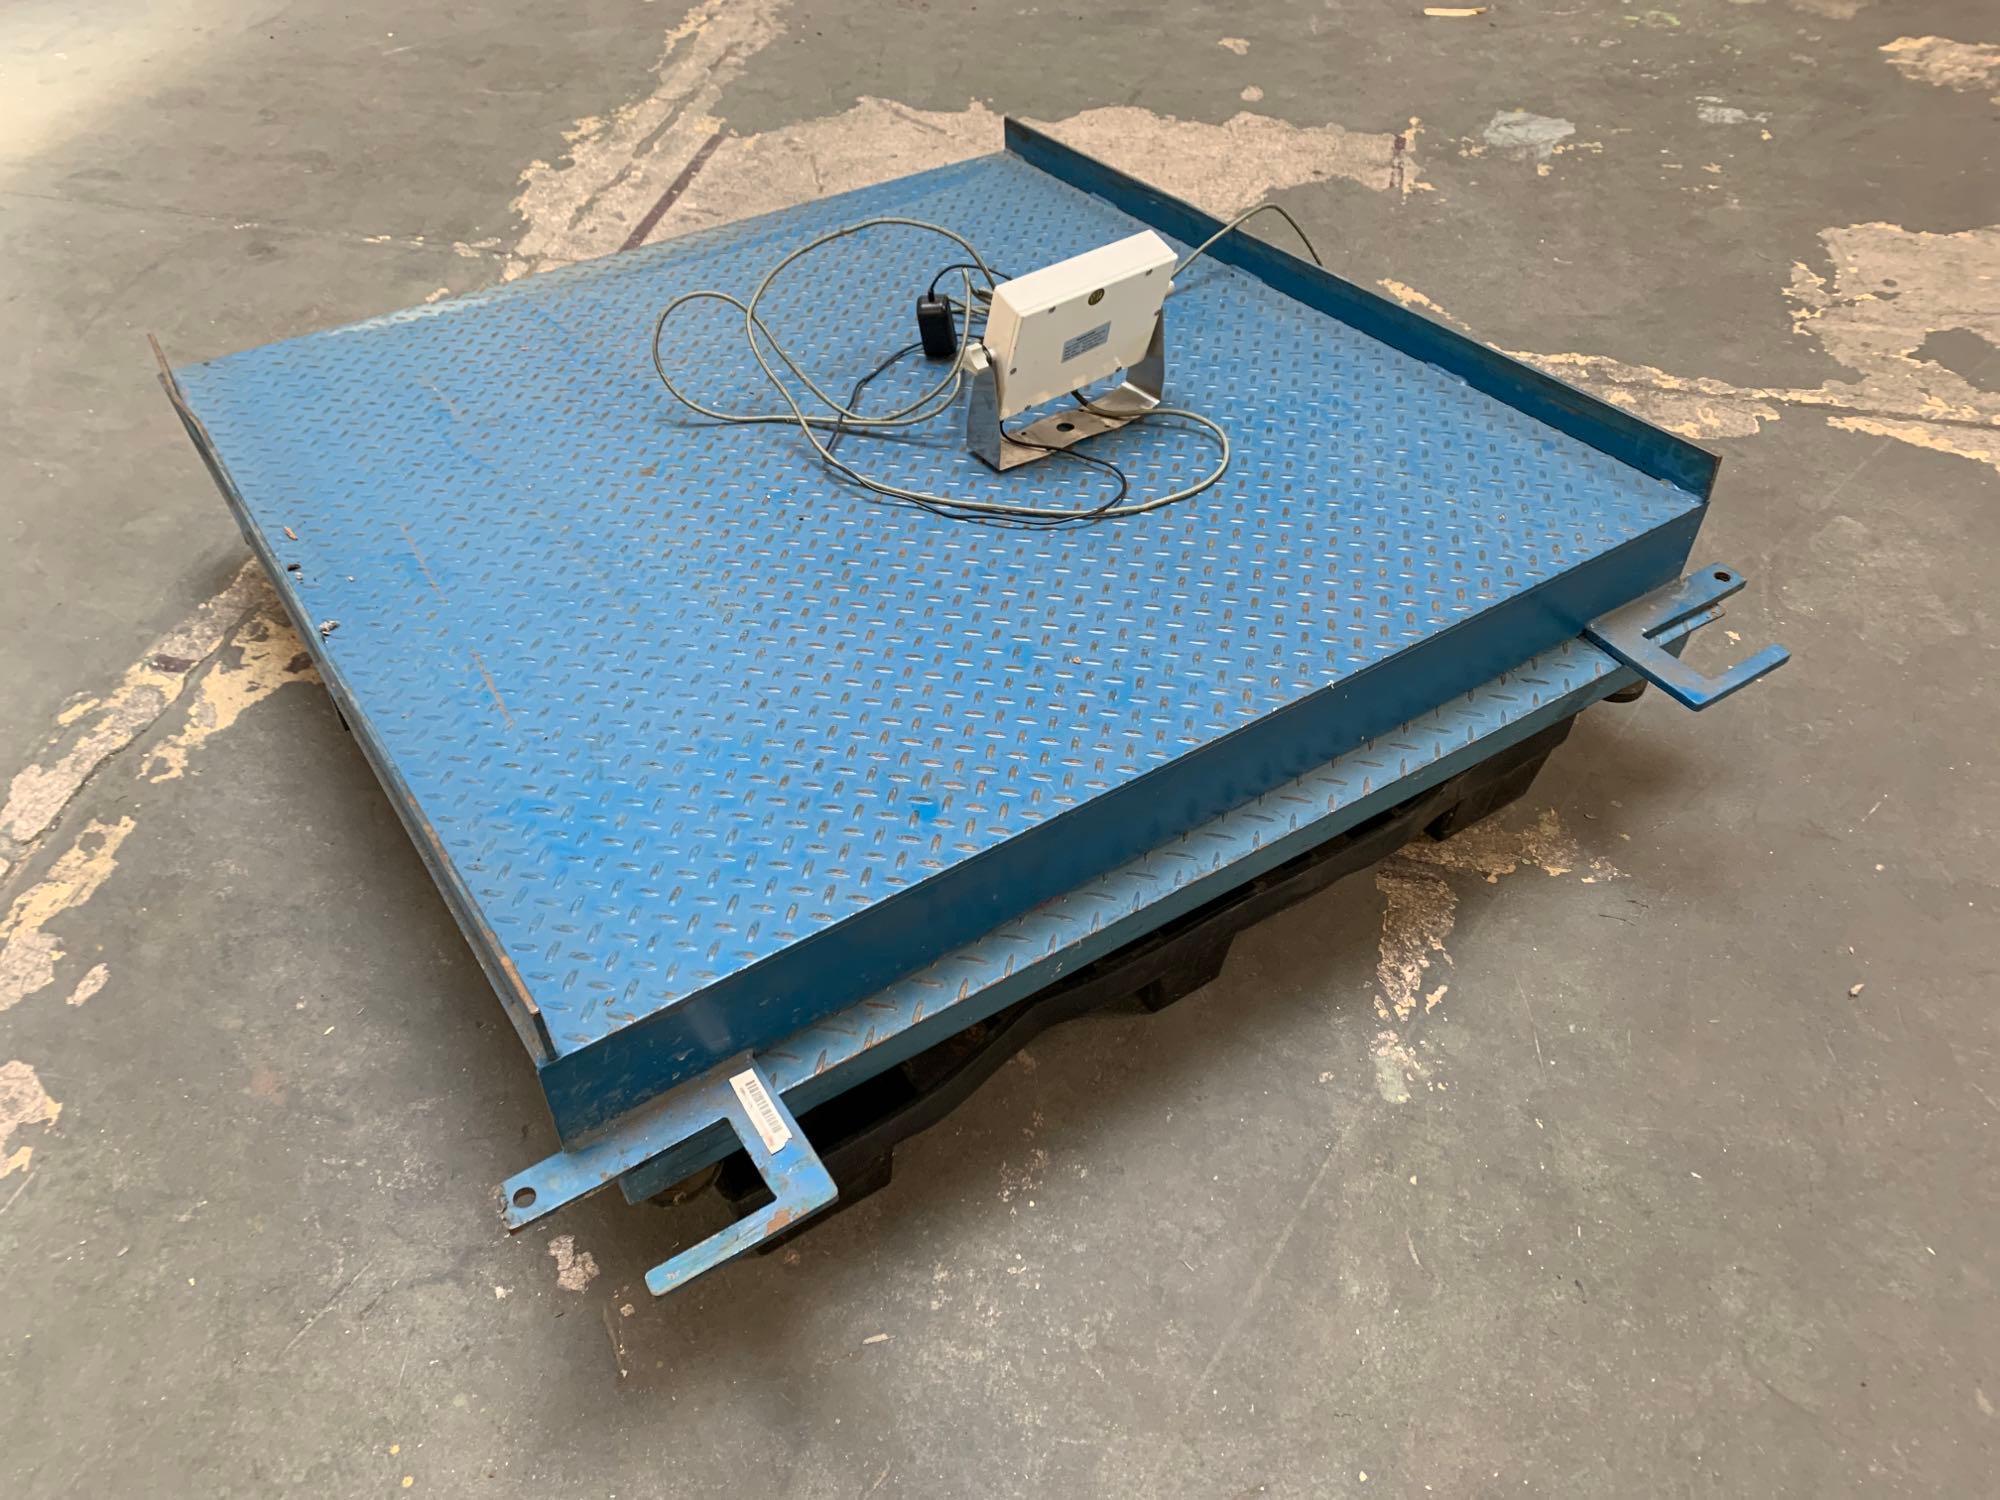 Inscale Industrial 48" x 48" Floor / Warehouse Shipping Scale with Ramp